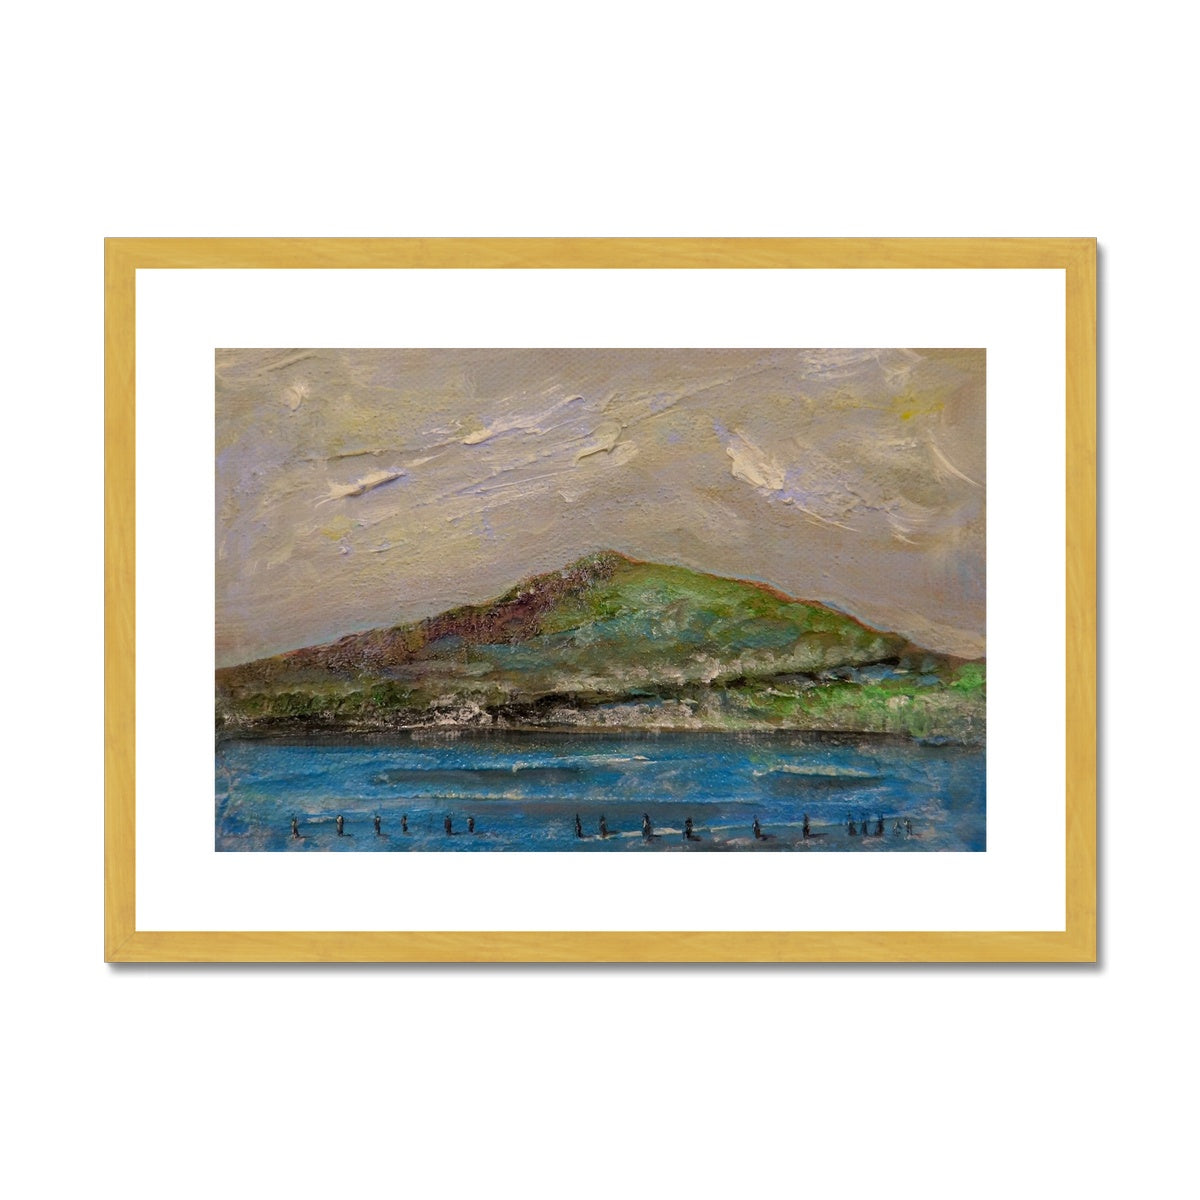 Ben Lomond iii Painting | Antique Framed & Mounted Prints From Scotland-Antique Framed & Mounted Prints-Scottish Lochs & Mountains Art Gallery-A2 Landscape-Gold Frame-Paintings, Prints, Homeware, Art Gifts From Scotland By Scottish Artist Kevin Hunter